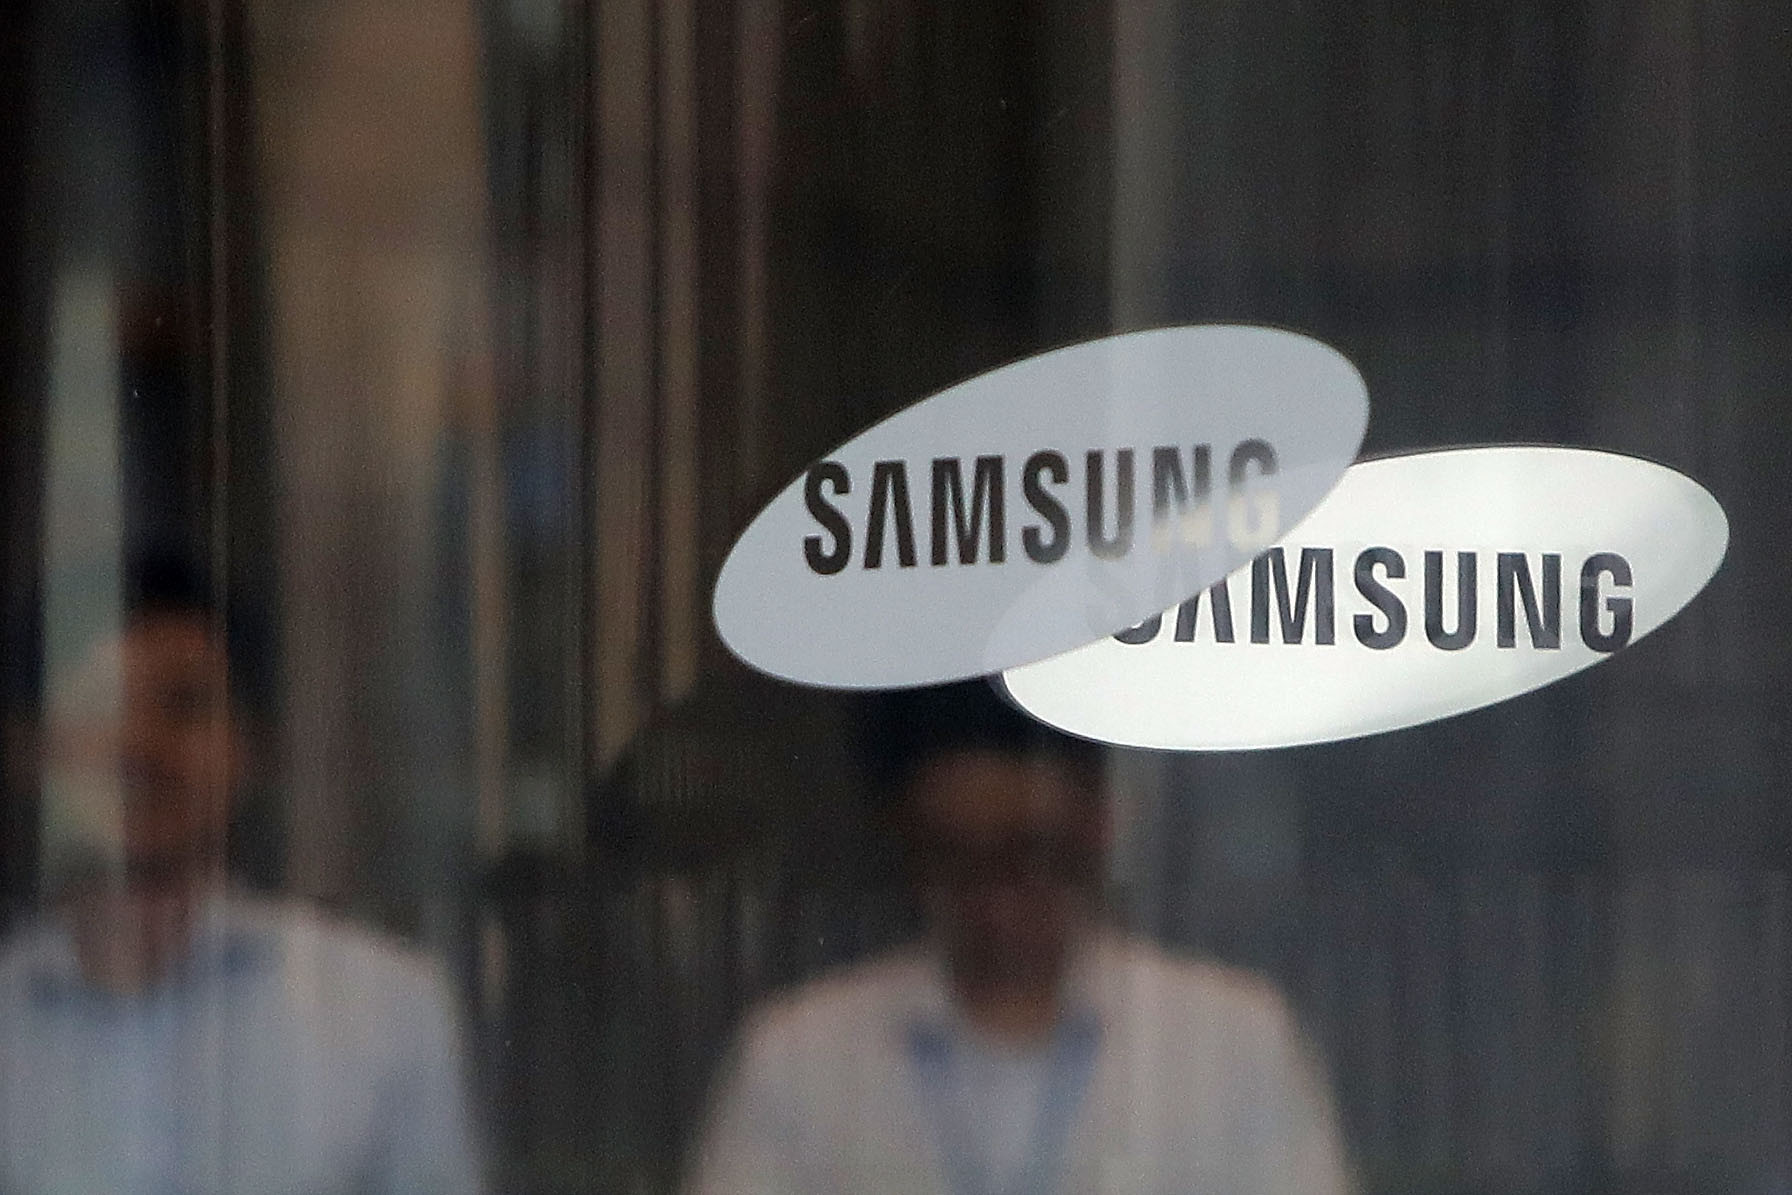 Samsung has posted strong financial results despite the pandemic ©Getty Images